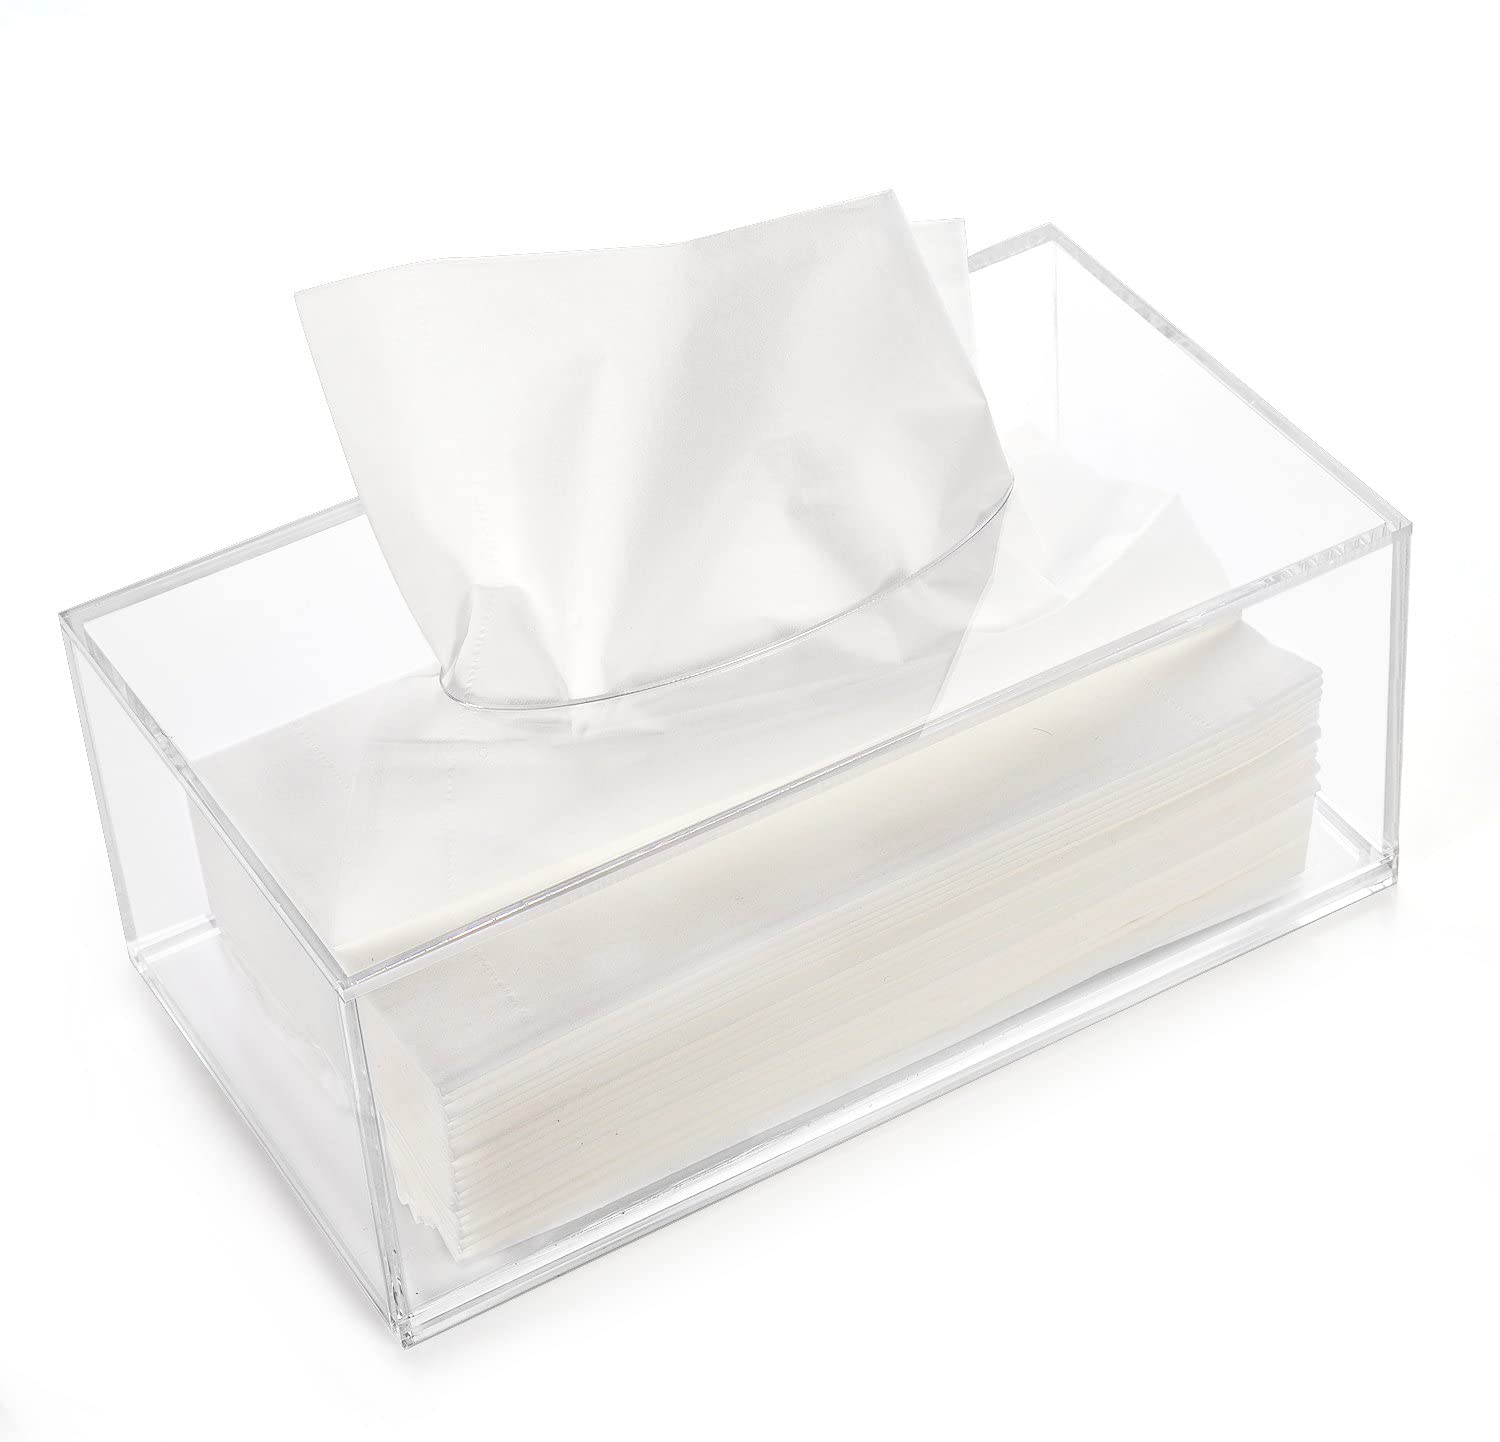 HBlife Facial Tissue Dispenser Box Cover Holder Clear Acrylic Rectangle Napkin Organizer for Bathroom, Kitchen and Office Room